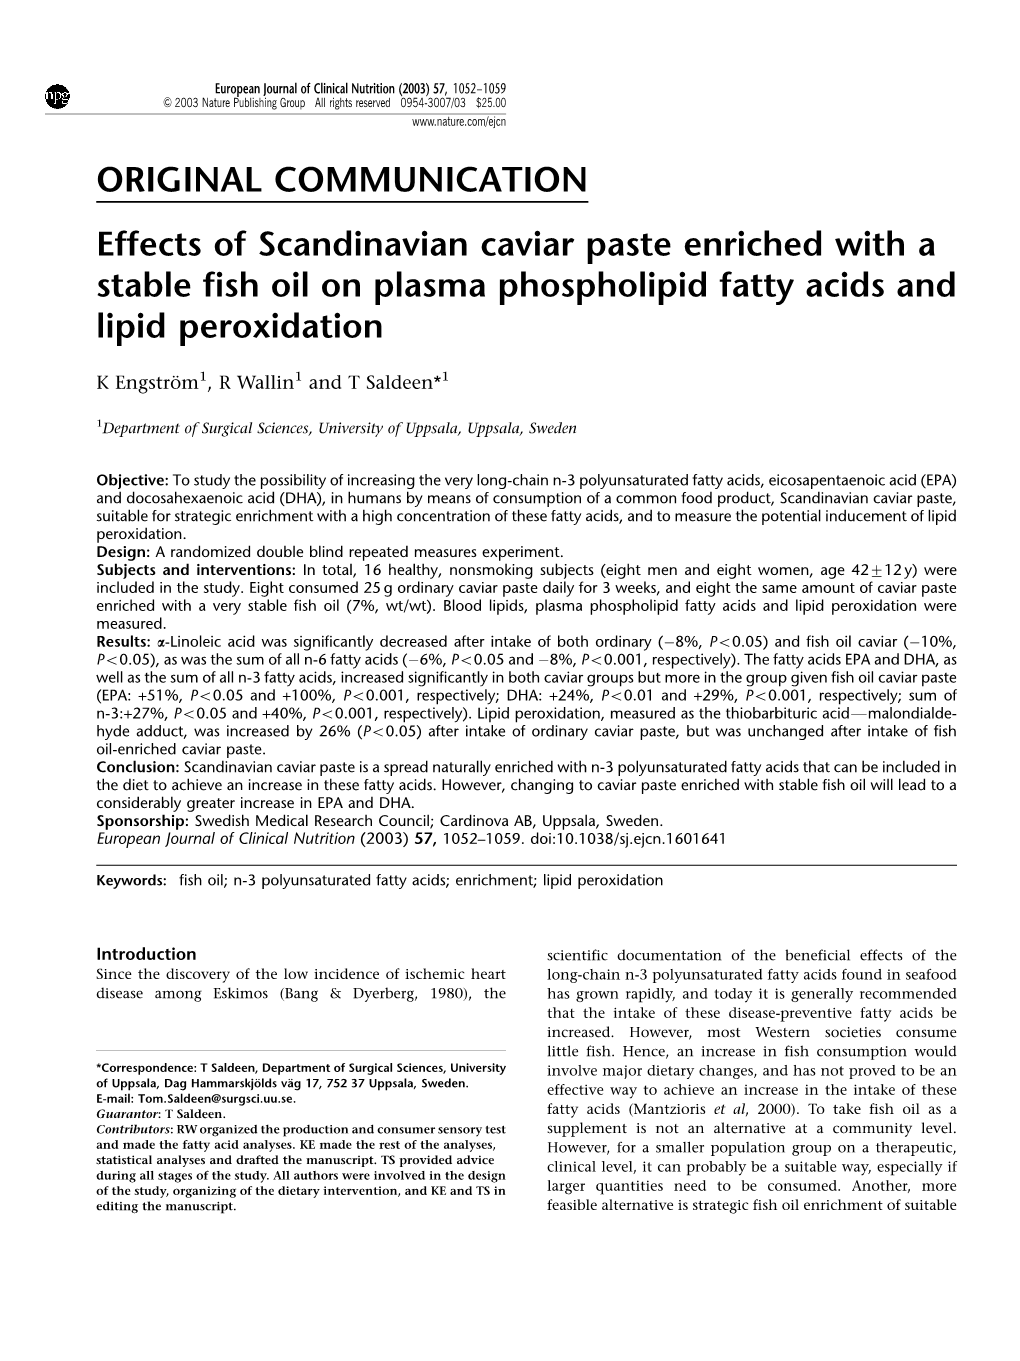 Effects of Scandinavian Caviar Paste Enriched with a Stable Fish Oil on Plasma Phospholipid Fatty Acids and Lipid Peroxidation